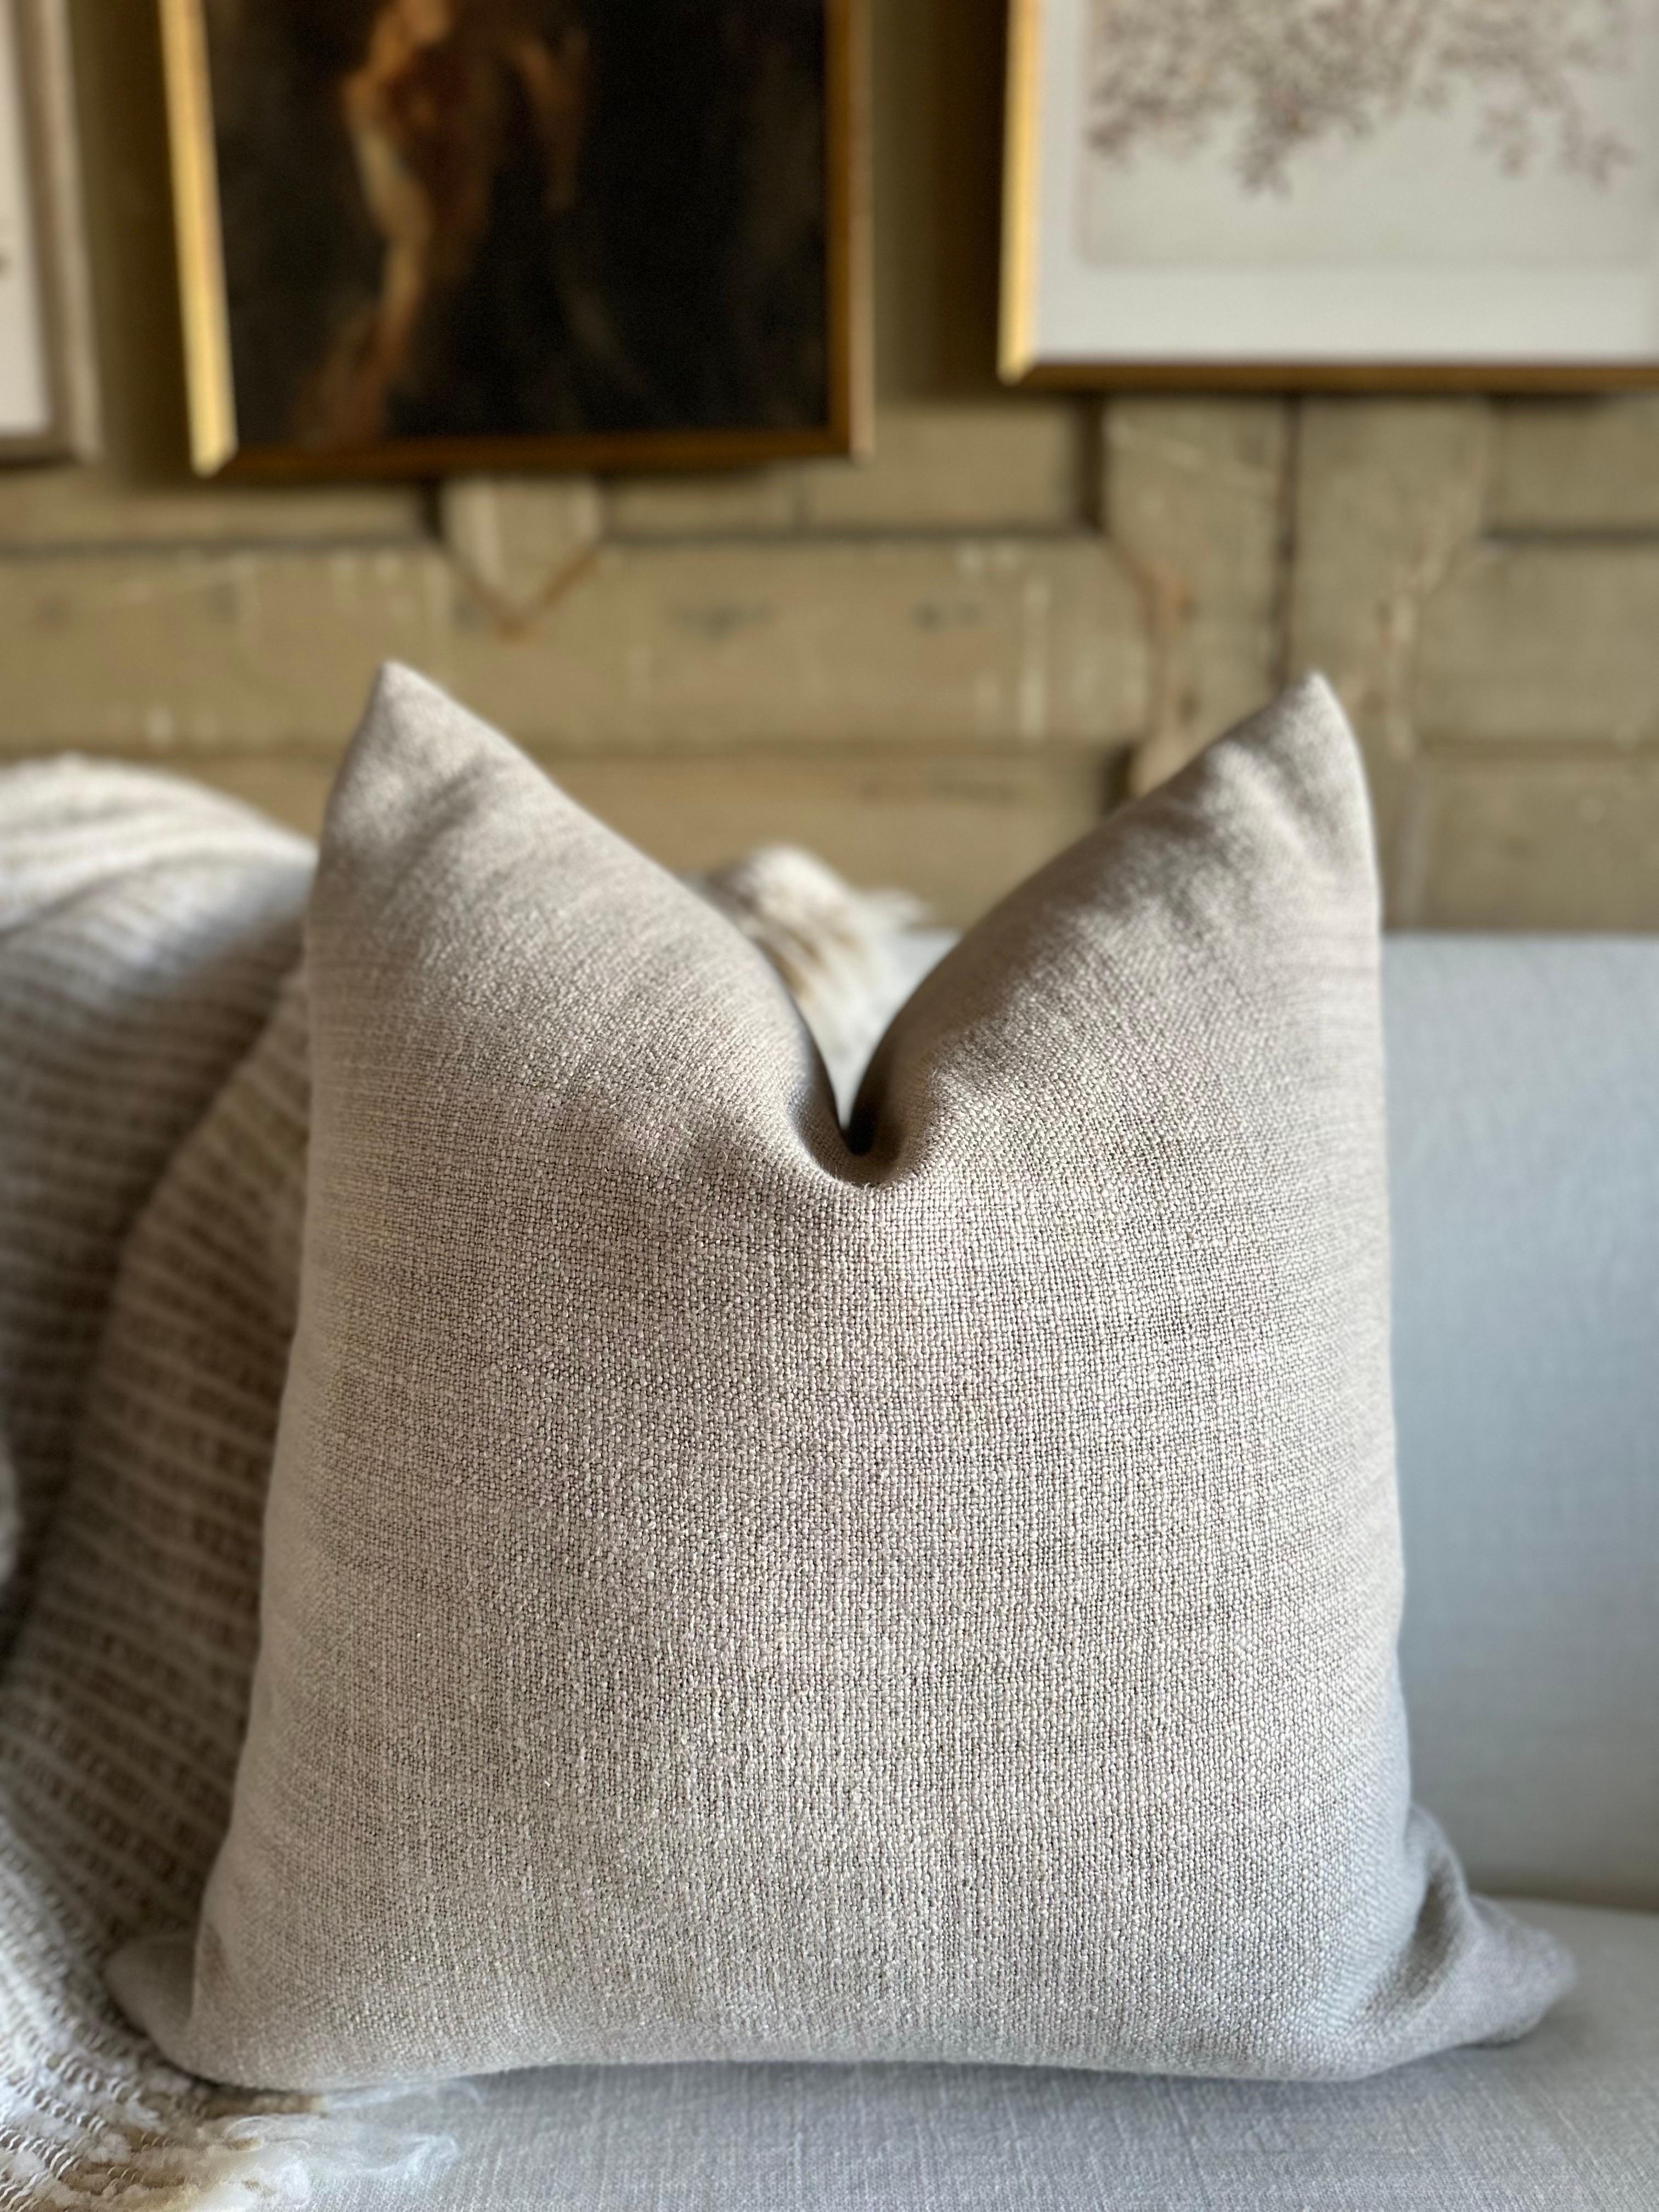 A luxurious heavy woven linen face with stone washed linen back.
Linen fabric is imported from France.
Custom made to order, can be customized to your size.
Color: Natural
Antique brass zipper
Size 22x22
Includes Down Feather Insert
Care: Can be